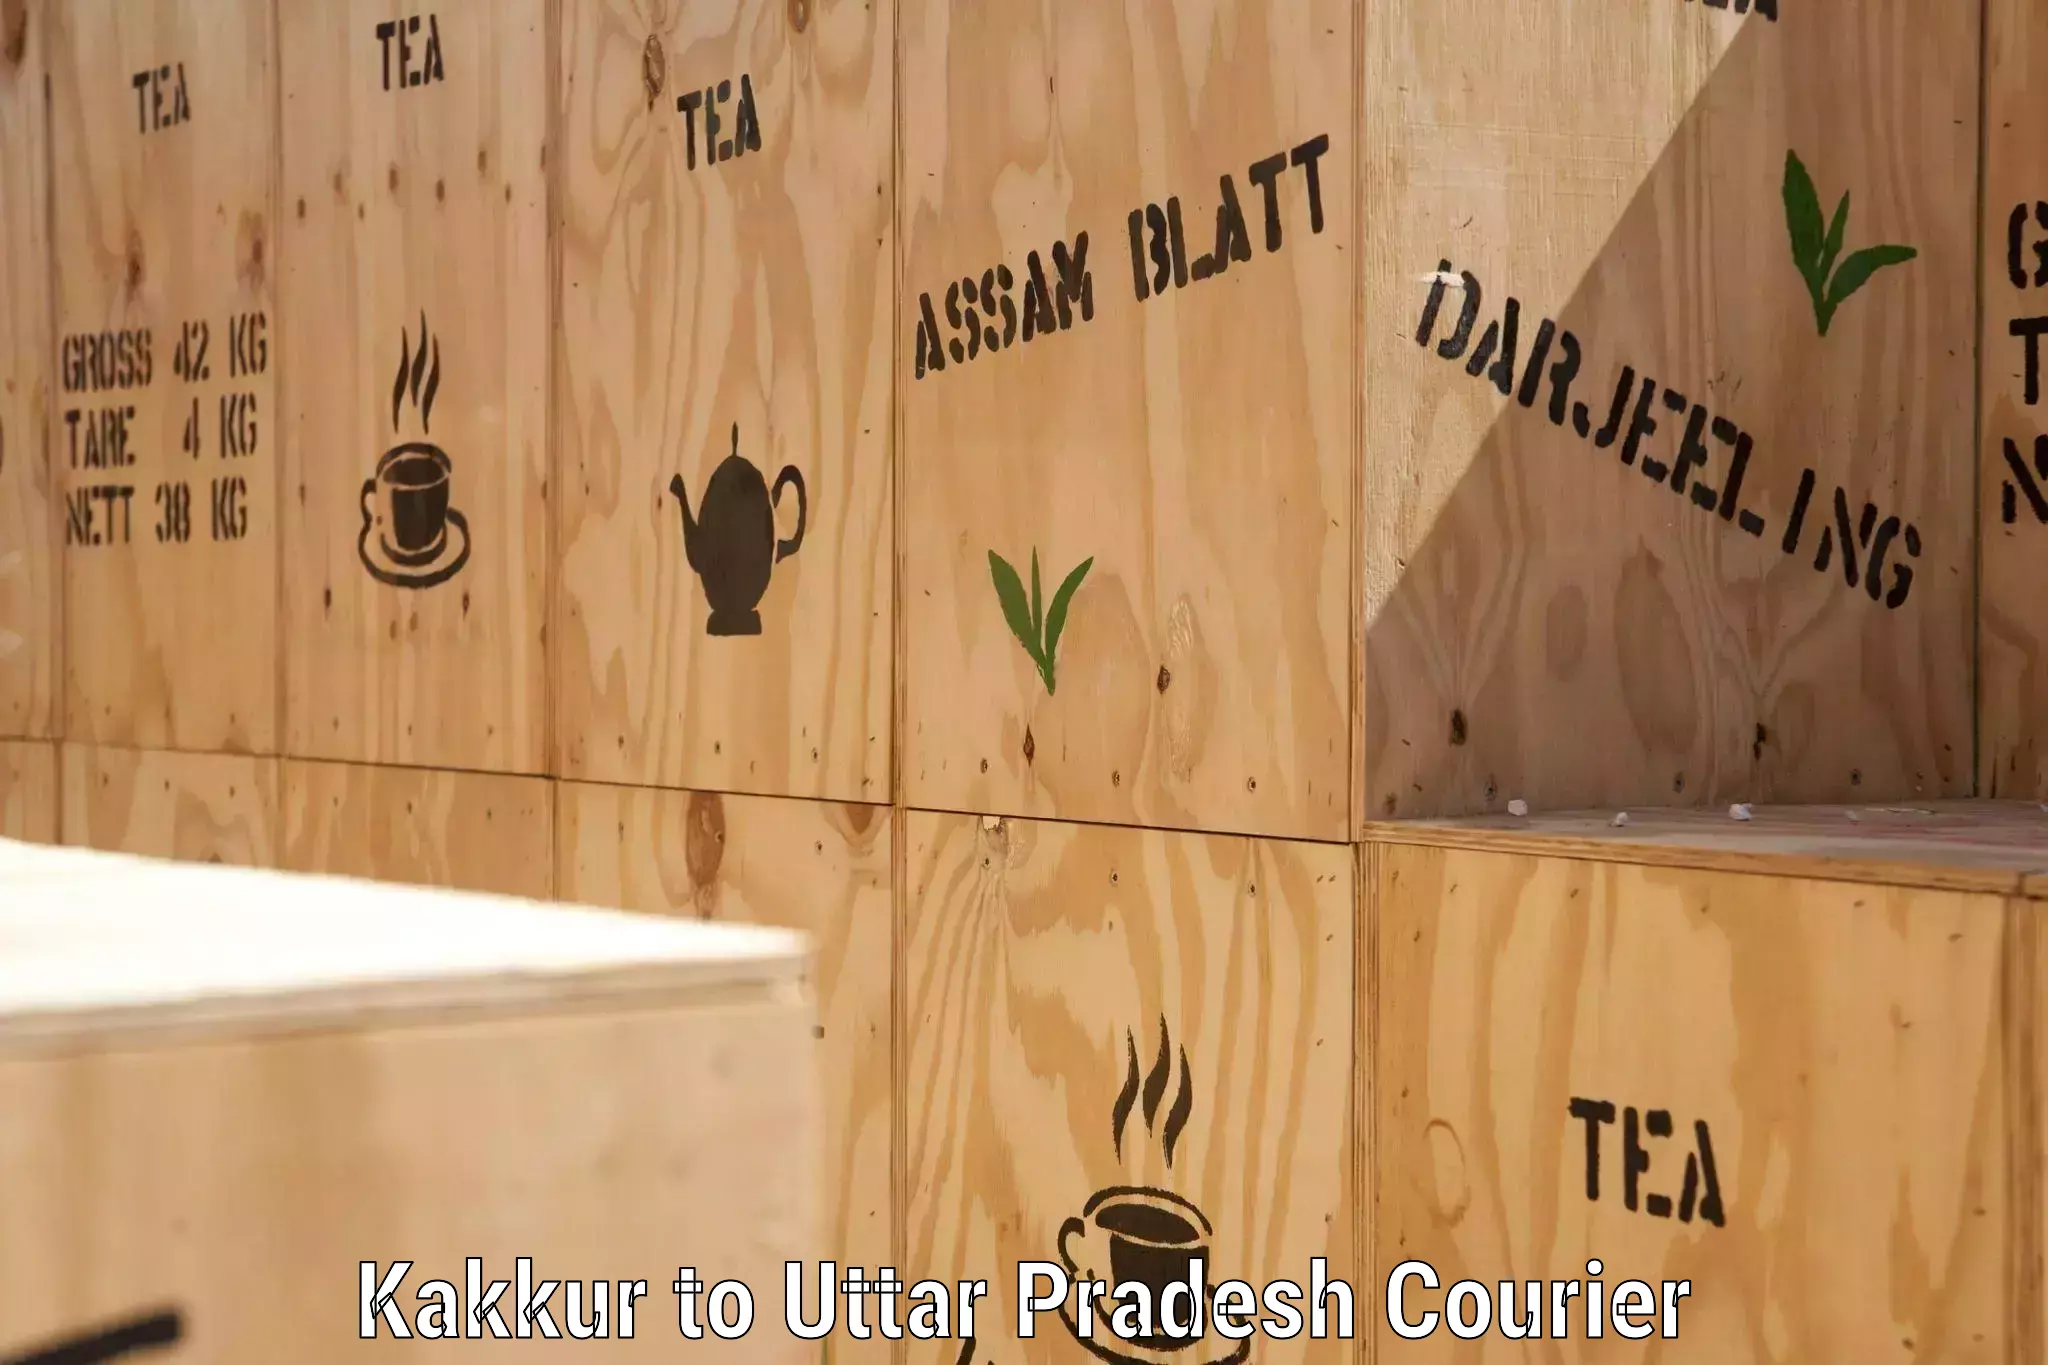 Easy access courier services in Kakkur to Afzalgarh